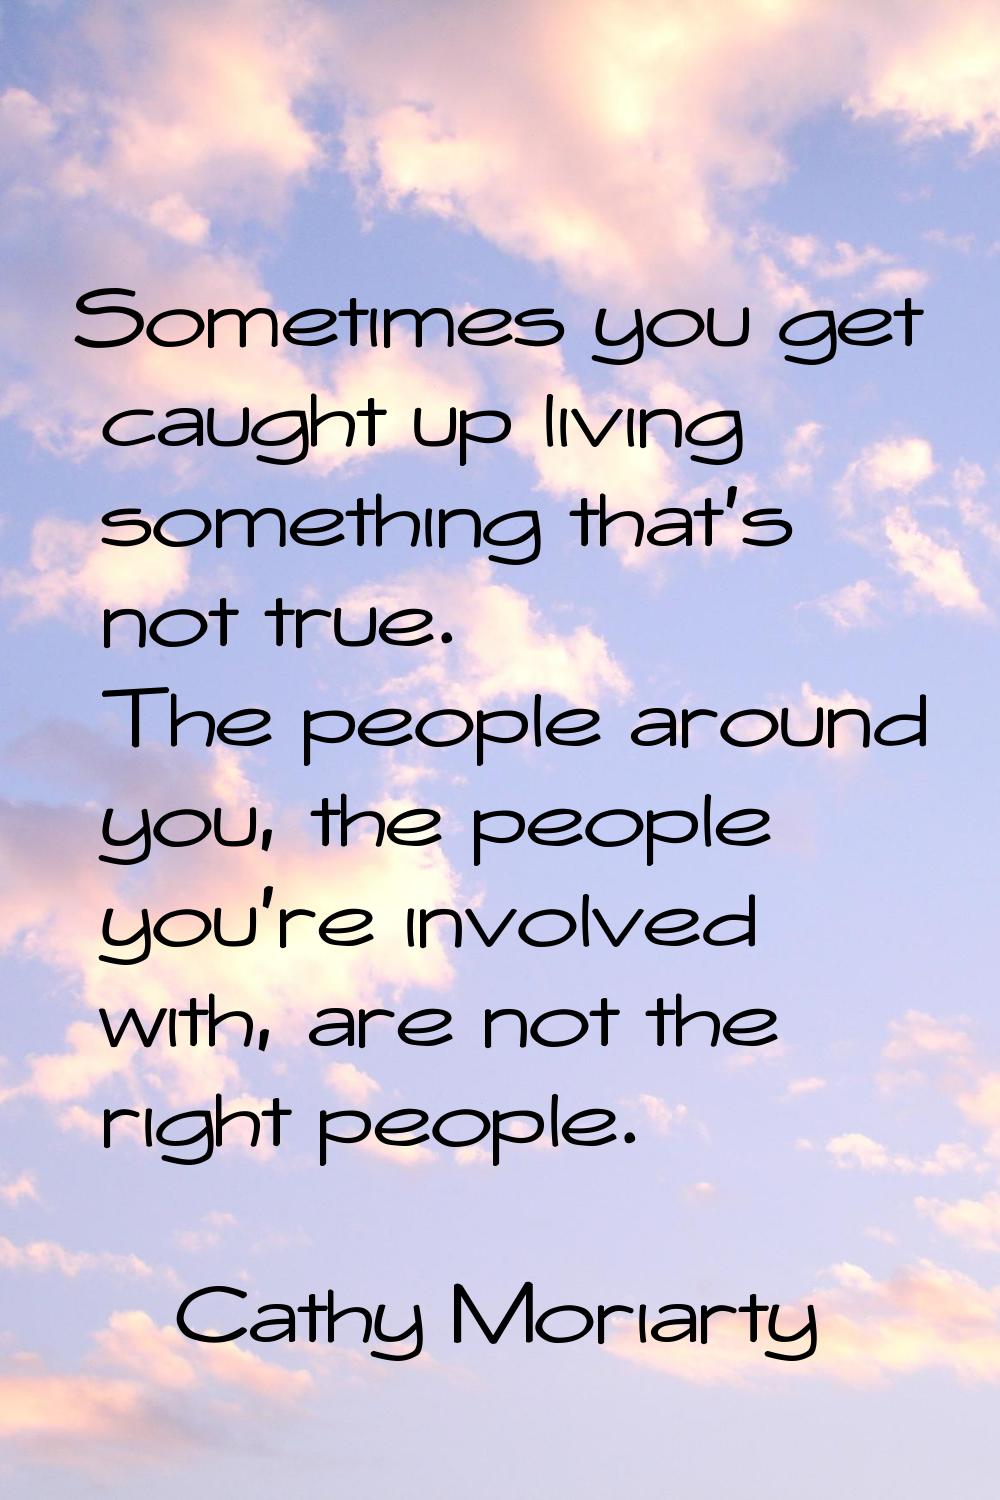 Sometimes you get caught up living something that's not true. The people around you, the people you